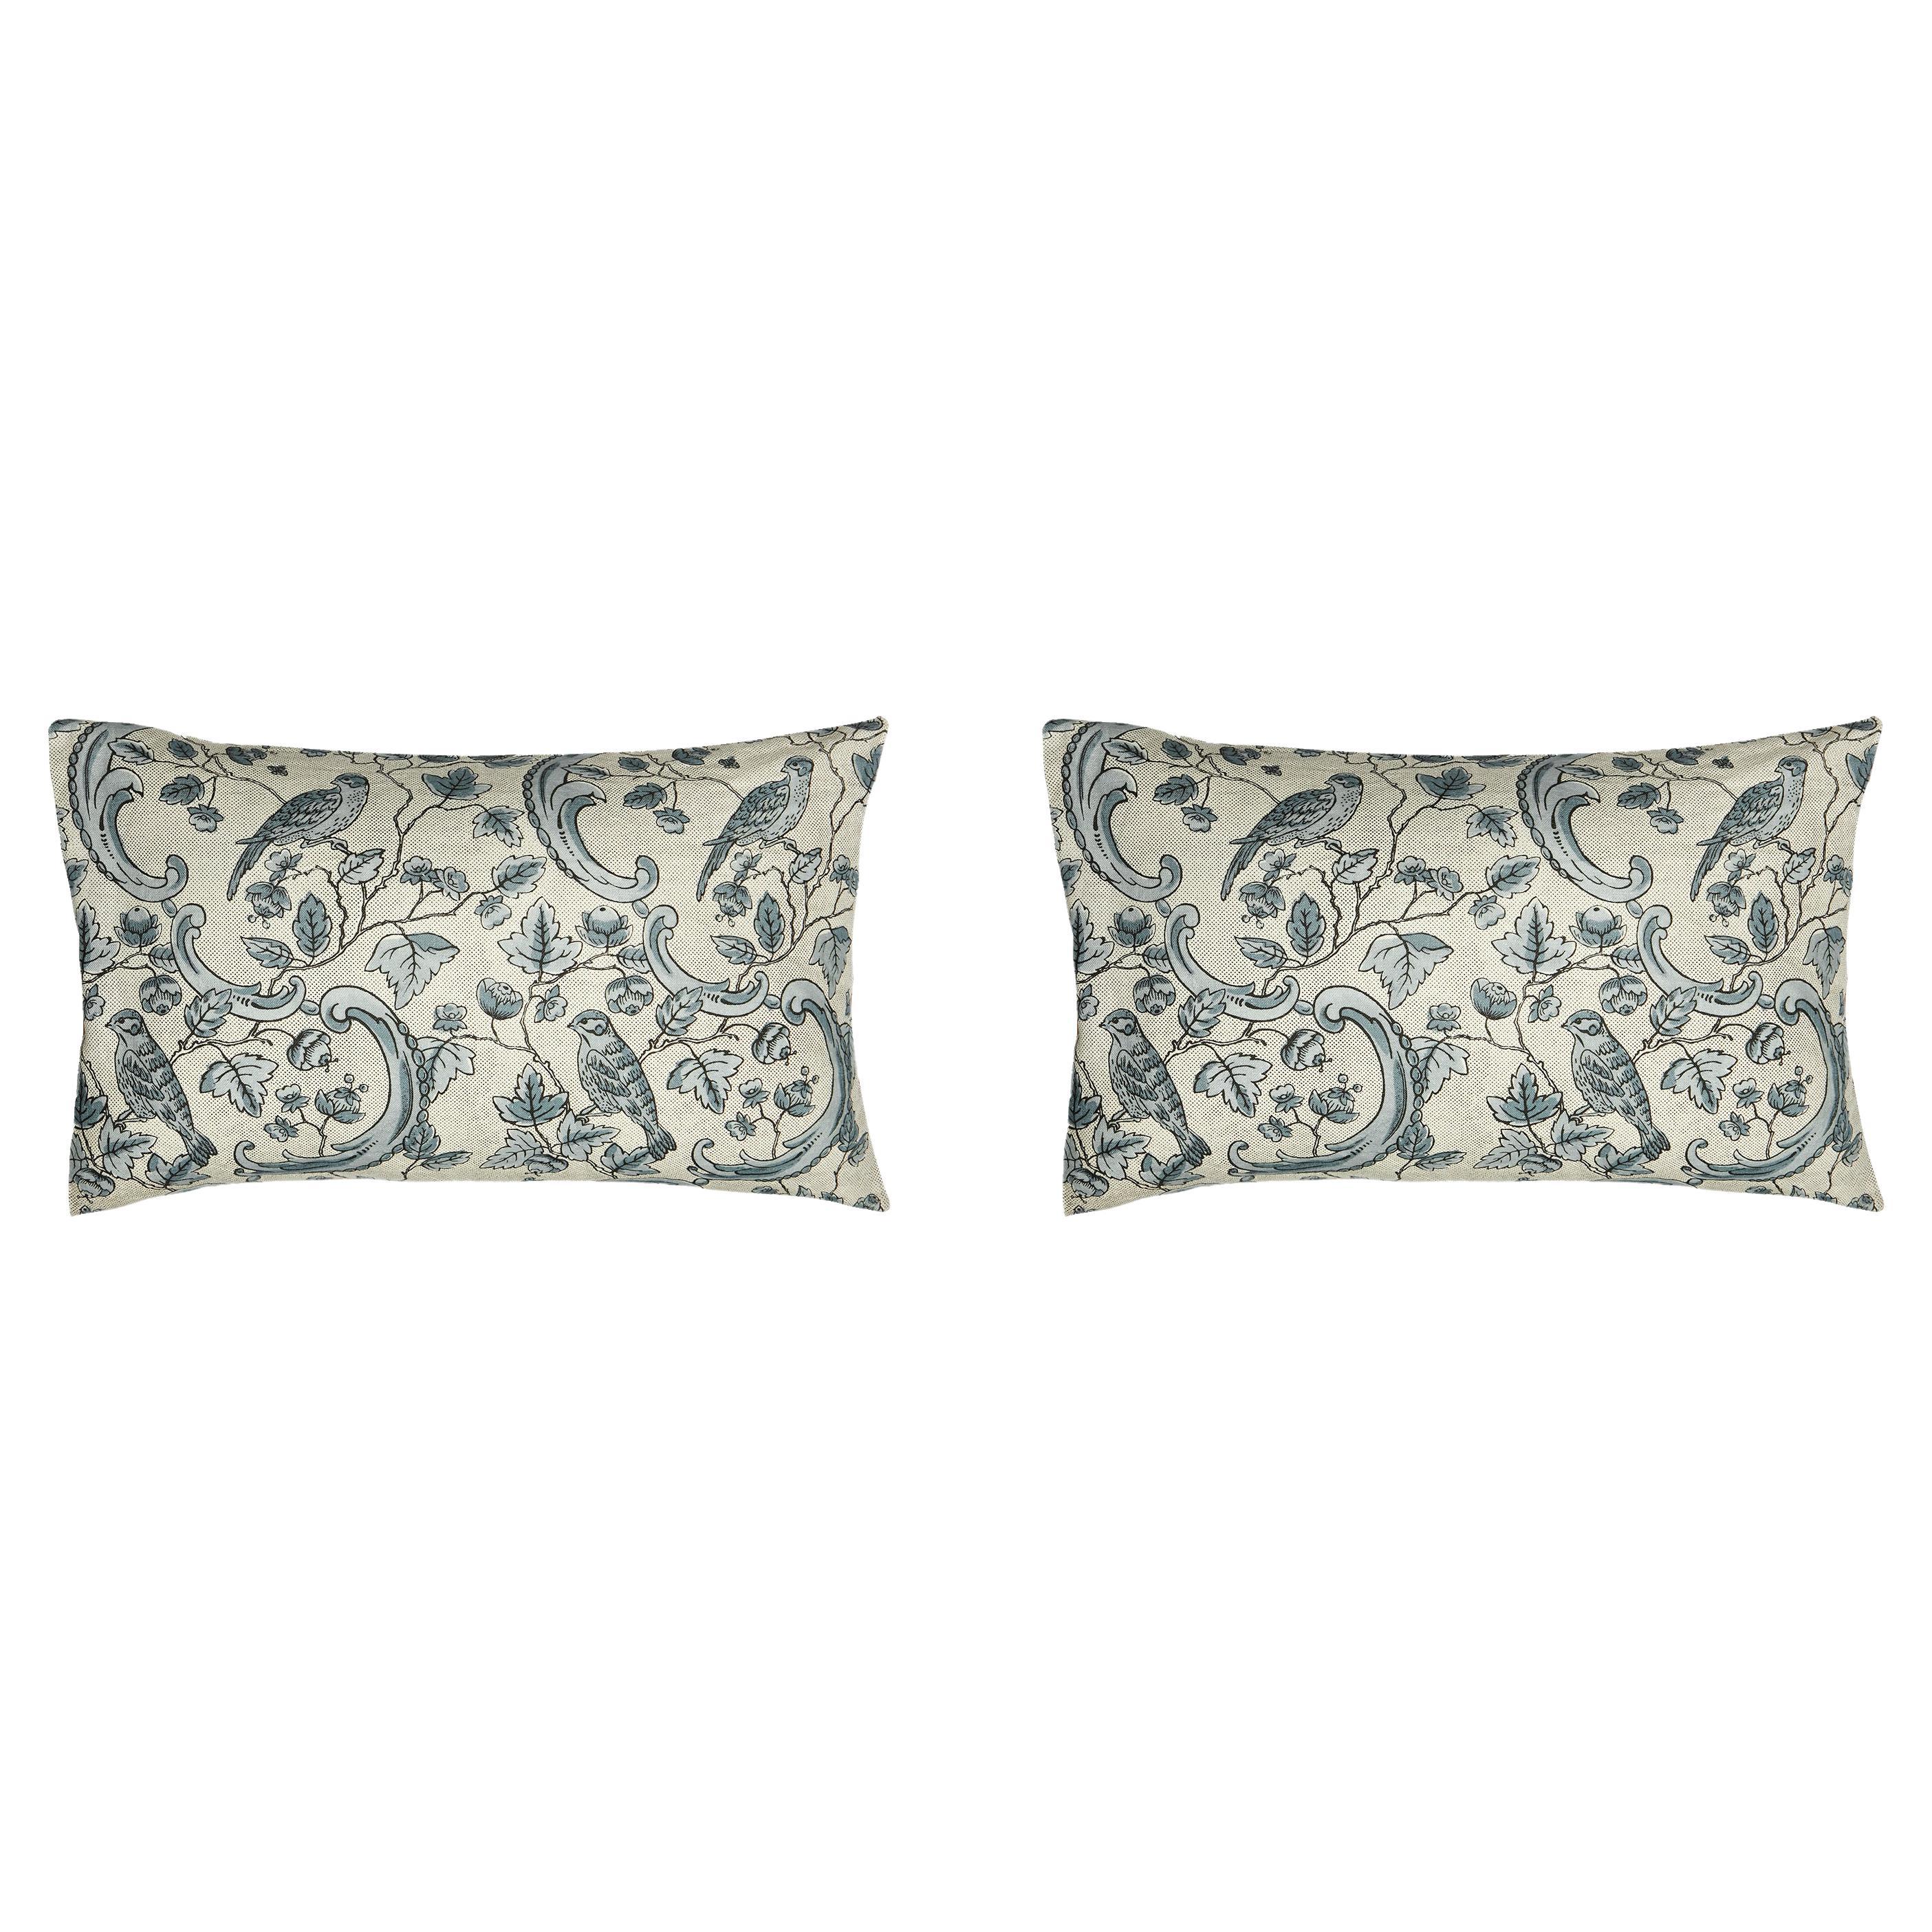 Pair of Linen Pillow Cushions - Oiseaux and Feuilla - Designed and Made in Paris